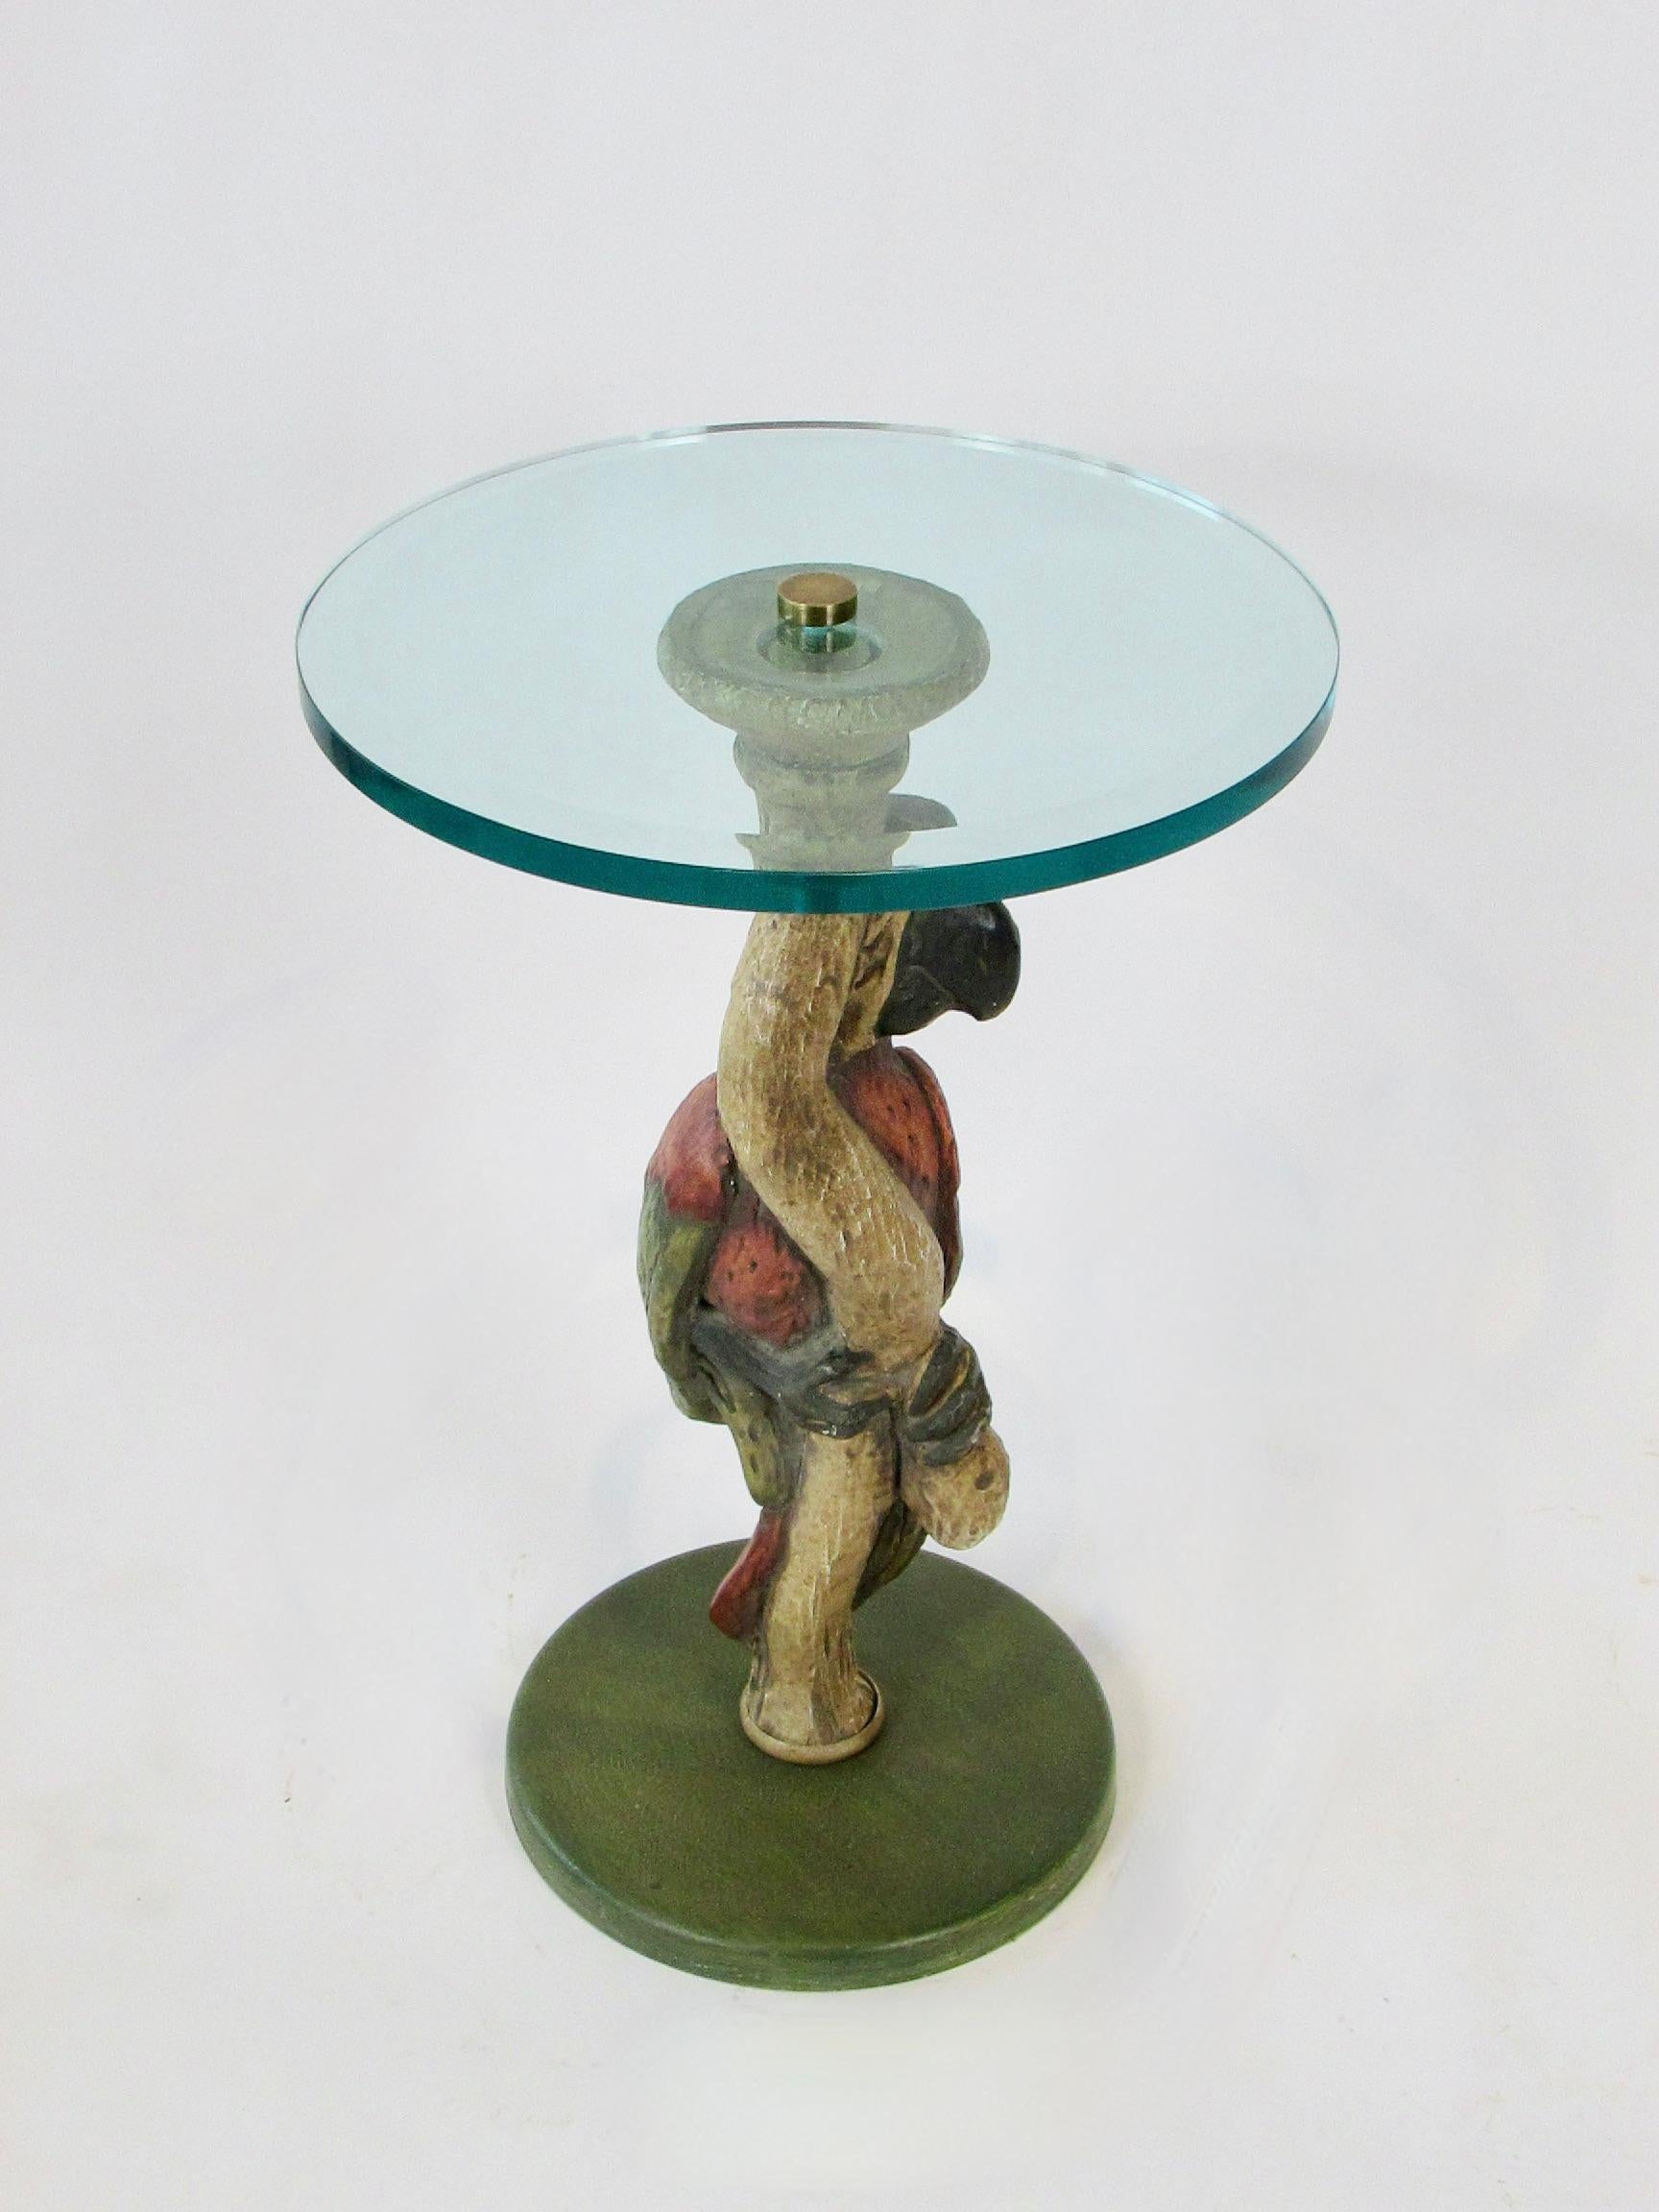 Whimsical Polly Want a Table Bevel Glass on Parrot Base Style of Maitland Smith For Sale 3